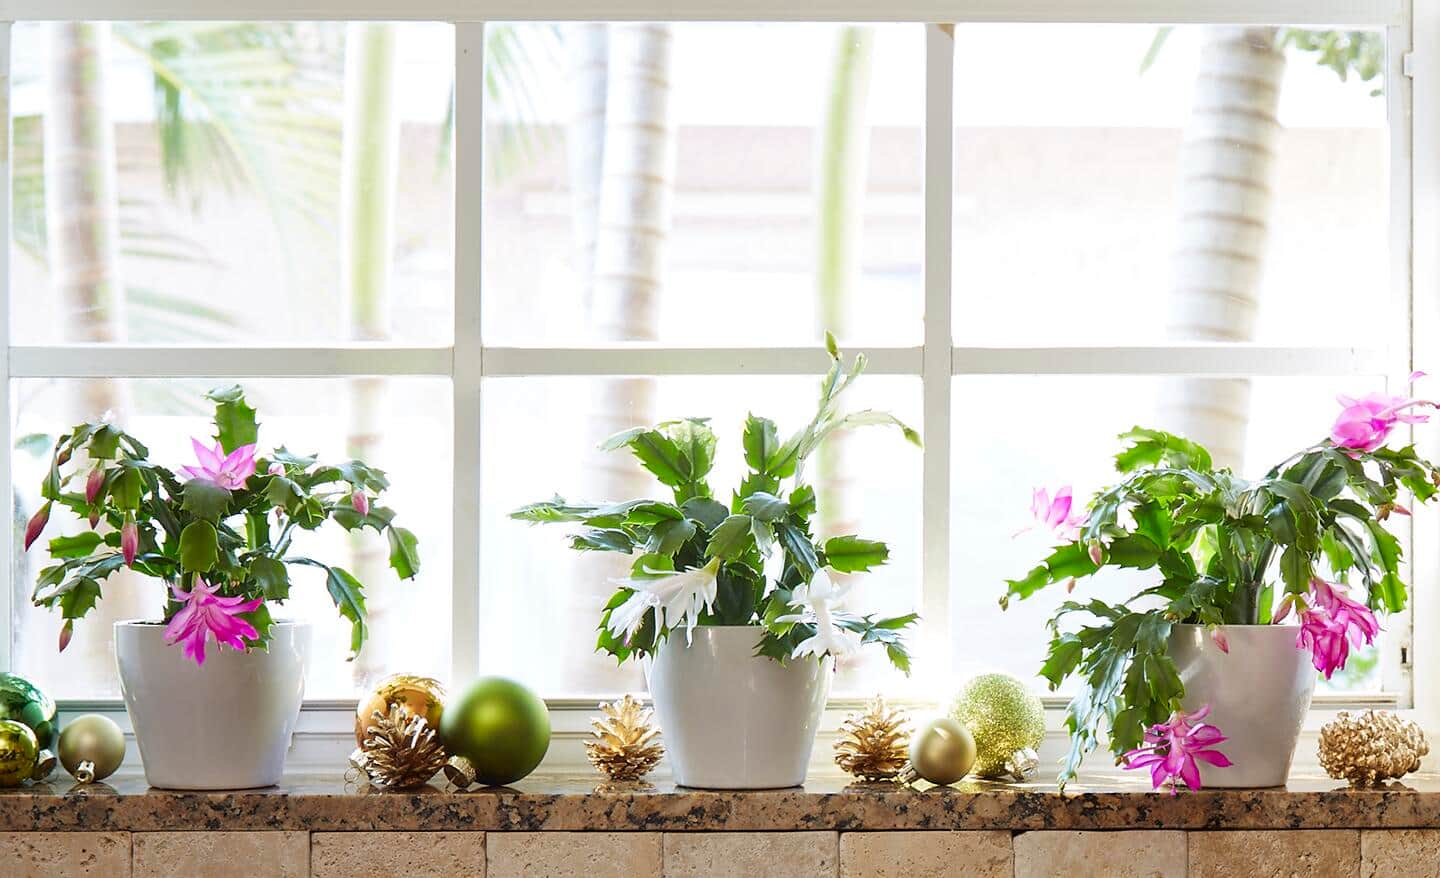 Three blooming Christmas cactus plants in a bright window